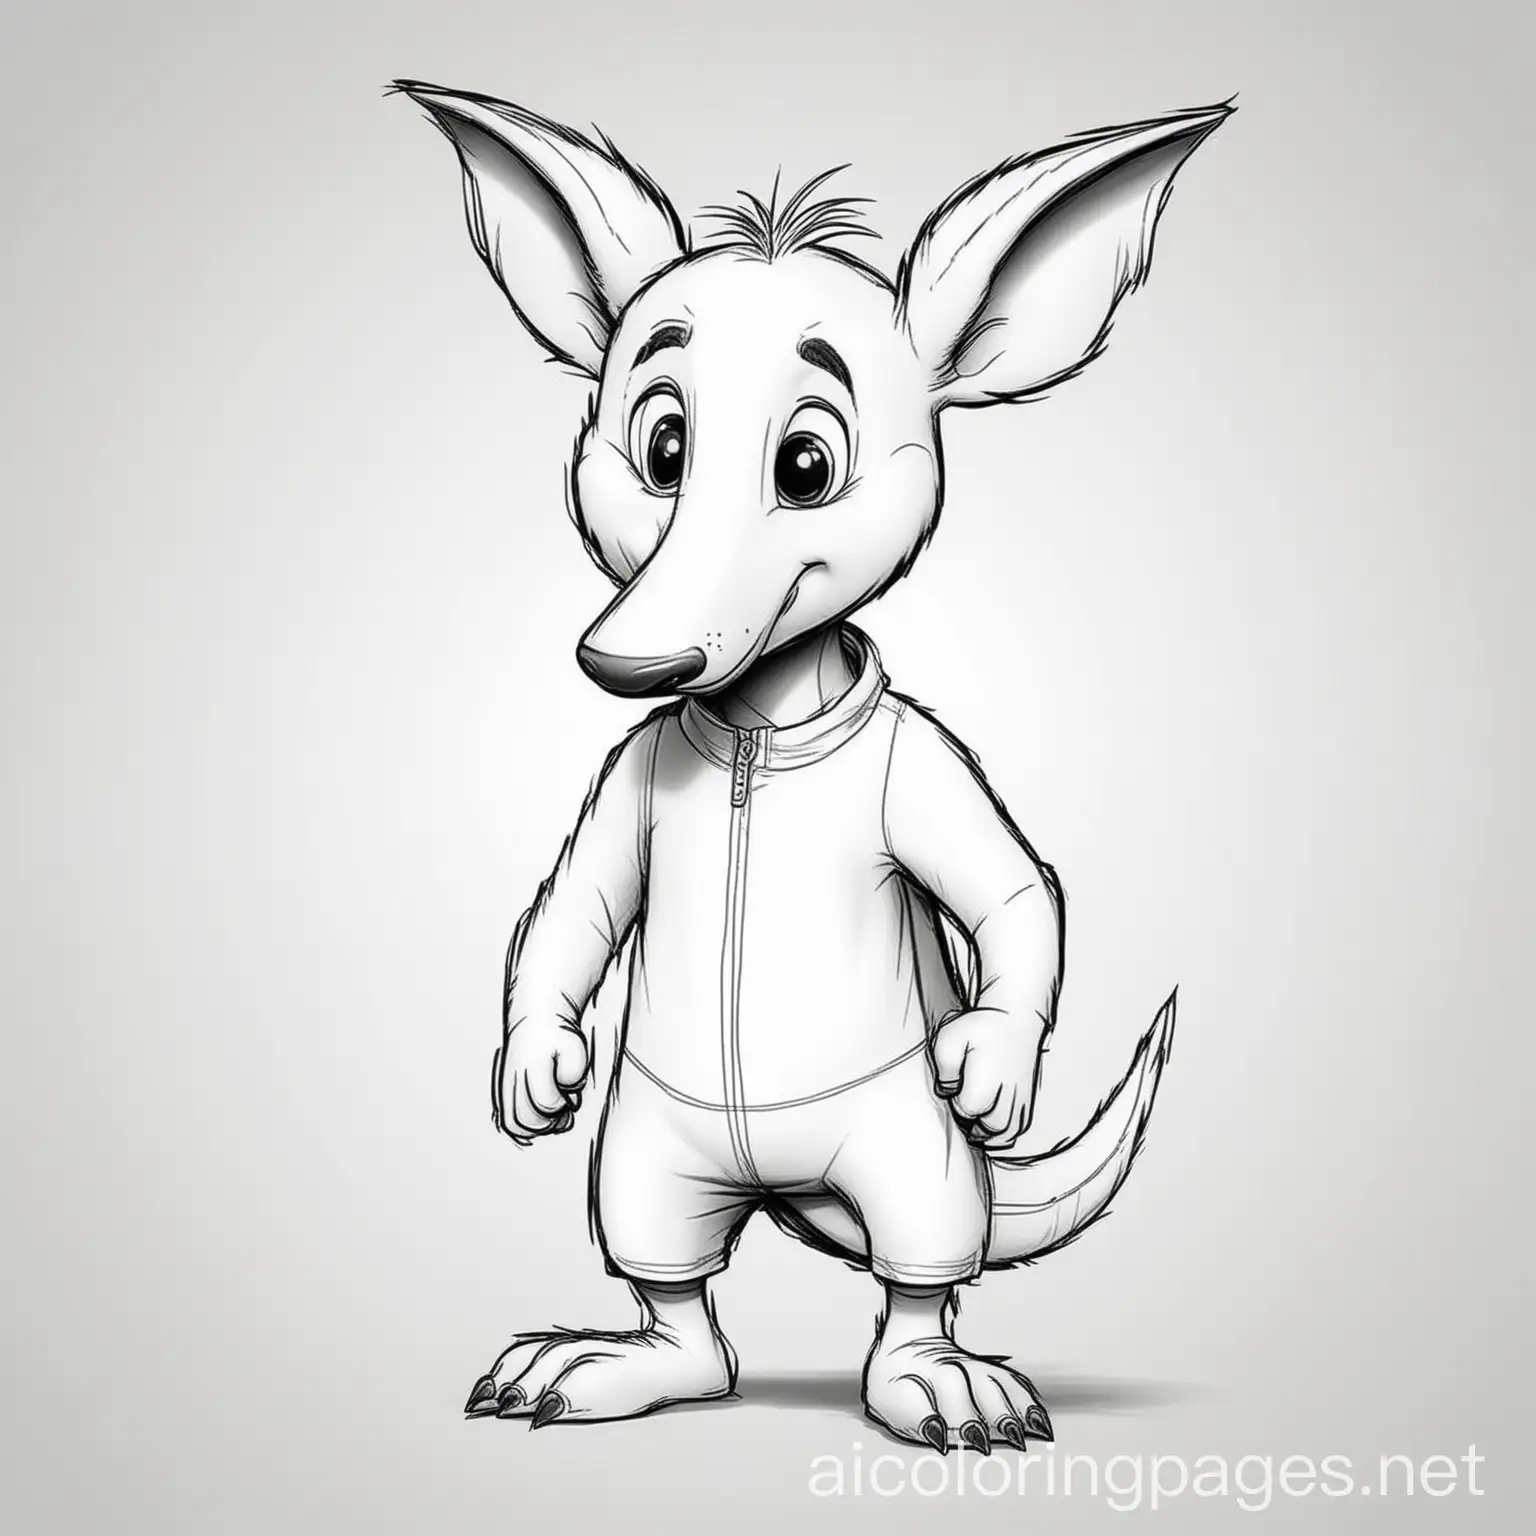 Aardvark cartoon character, Coloring Page, black and white, line art, white background, Simplicity, Ample White Space. The background of the coloring page is plain white to make it easy for young children to color within the lines. The outlines of all the subjects are easy to distinguish, making it simple for kids to color without too much difficulty